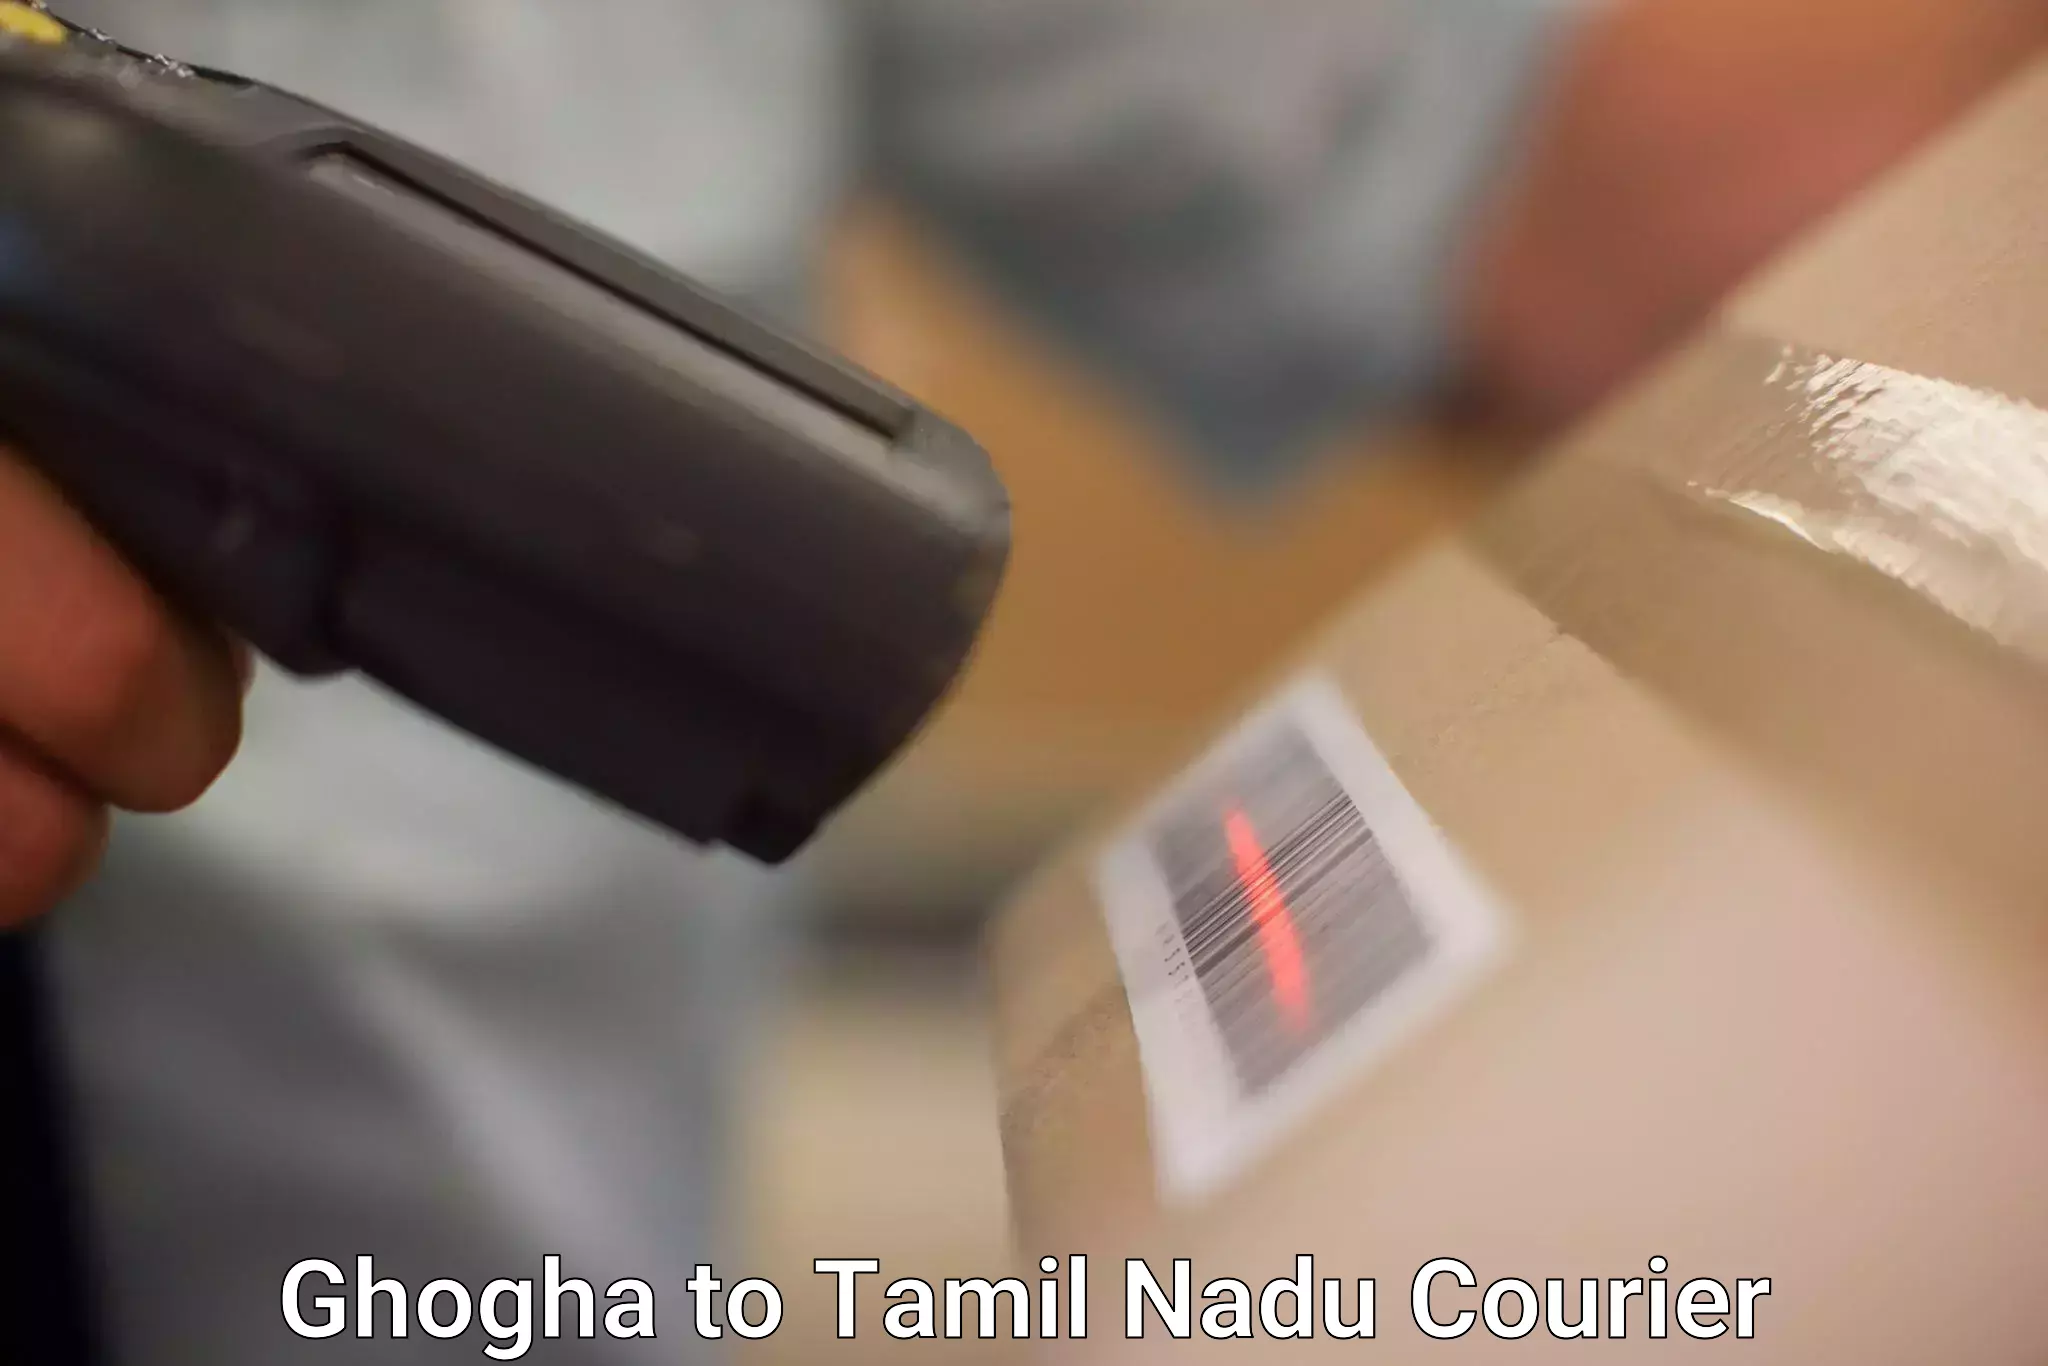 Shipping and handling Ghogha to Tamil Nadu